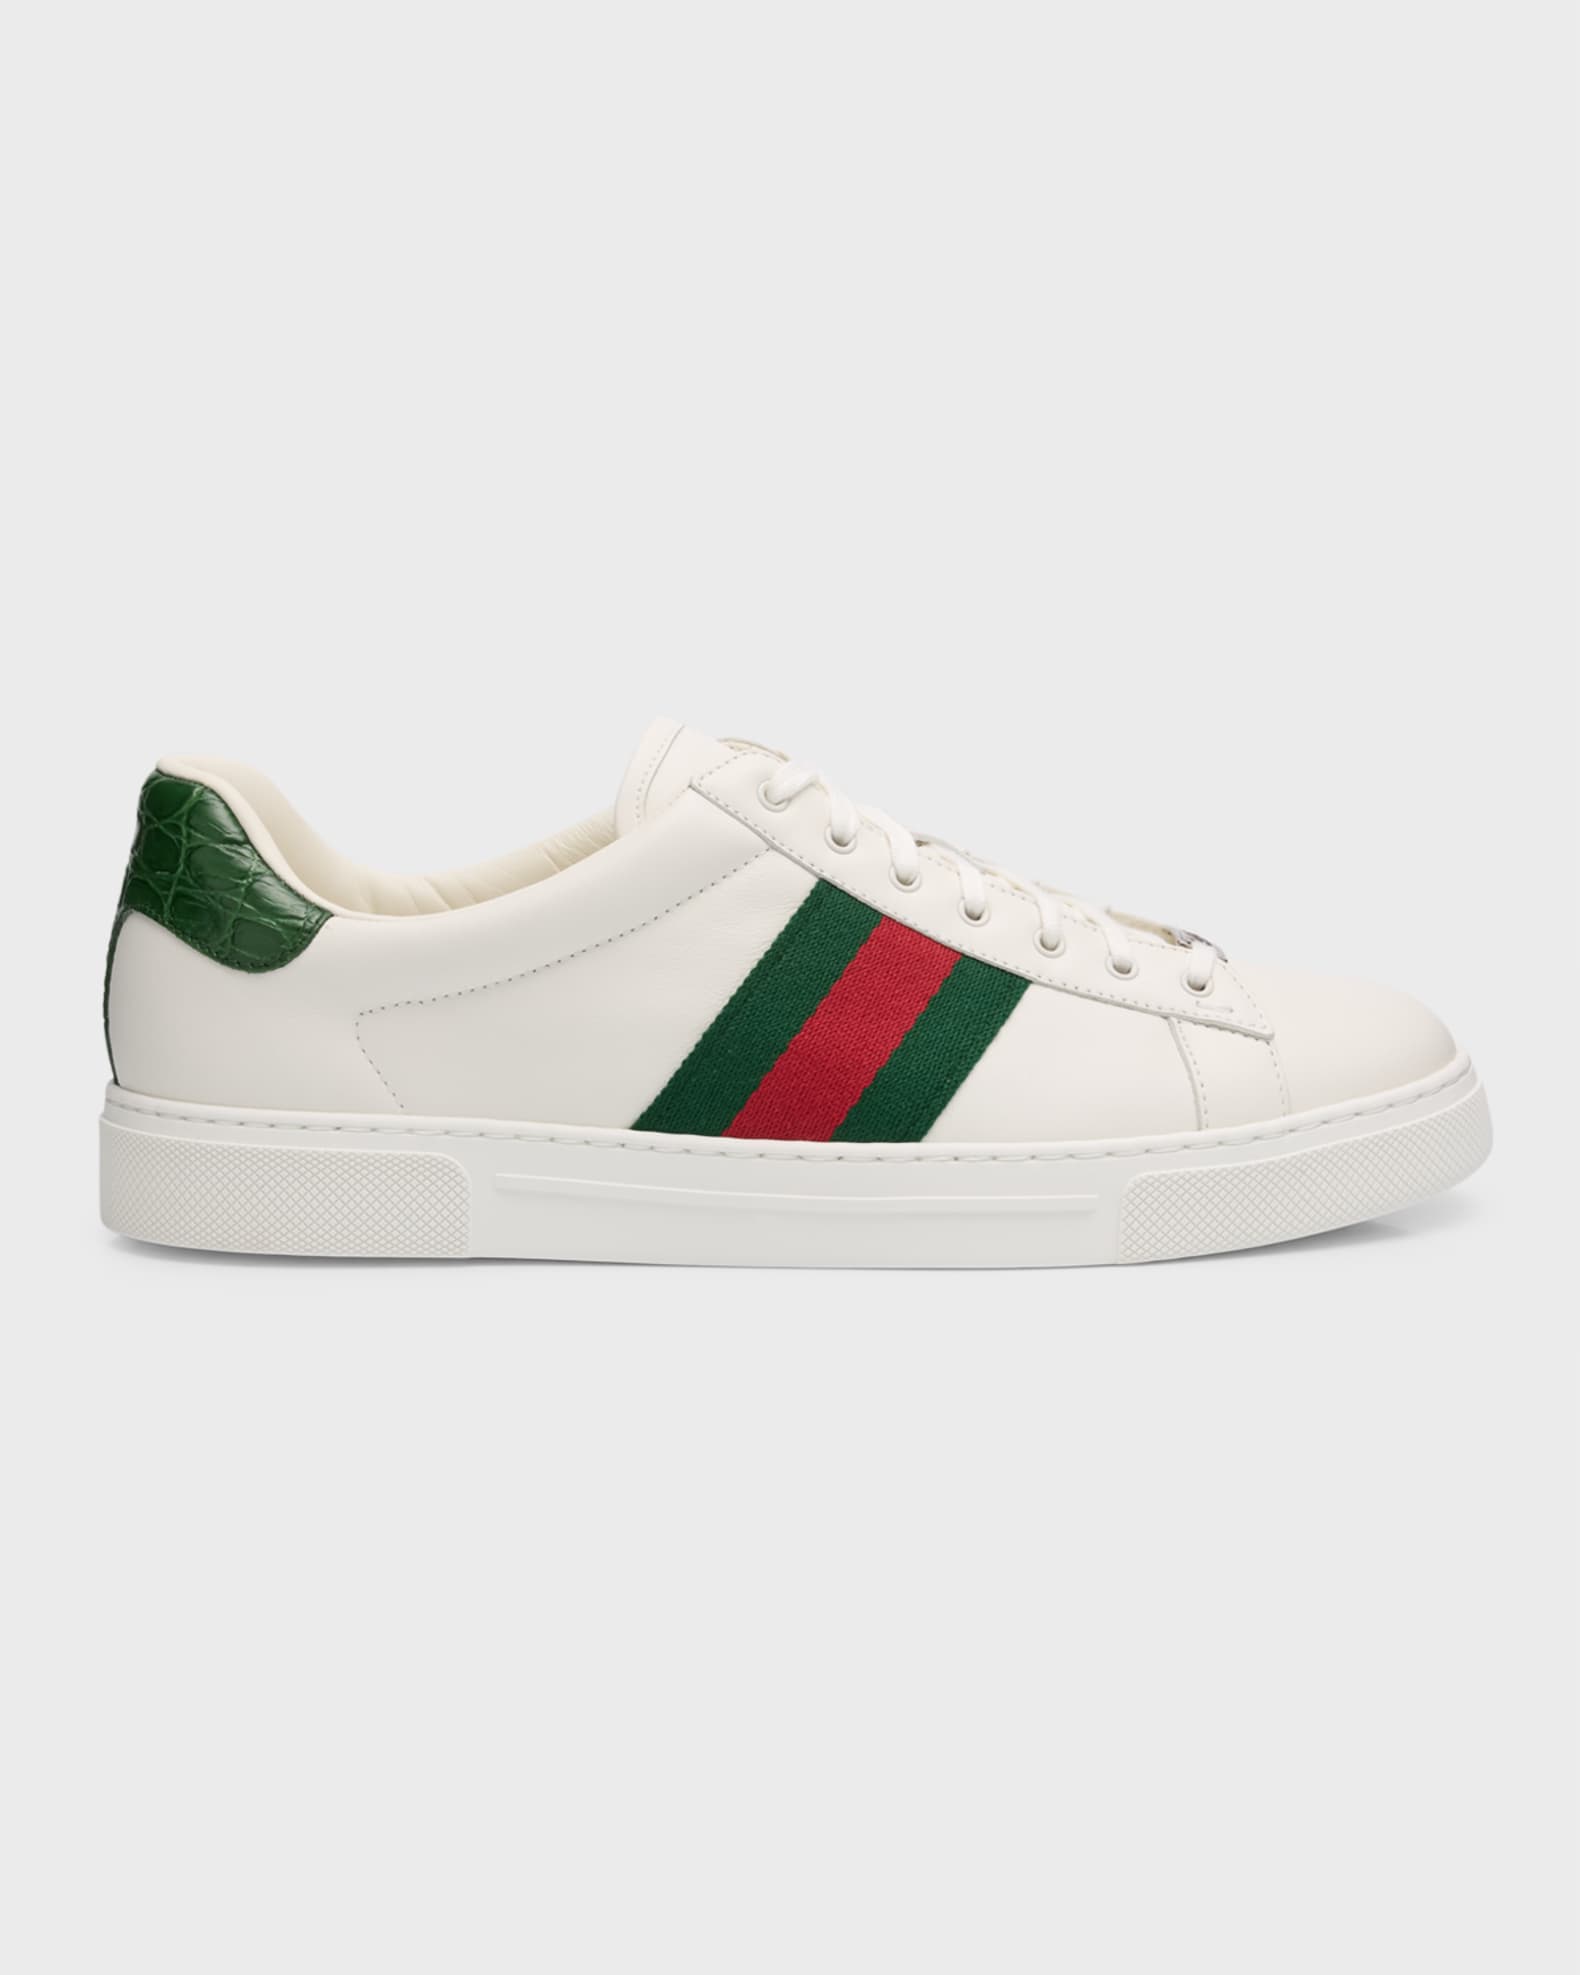 Gucci Men's Ace Leather Web Low-Top Sneakers | Neiman Marcus